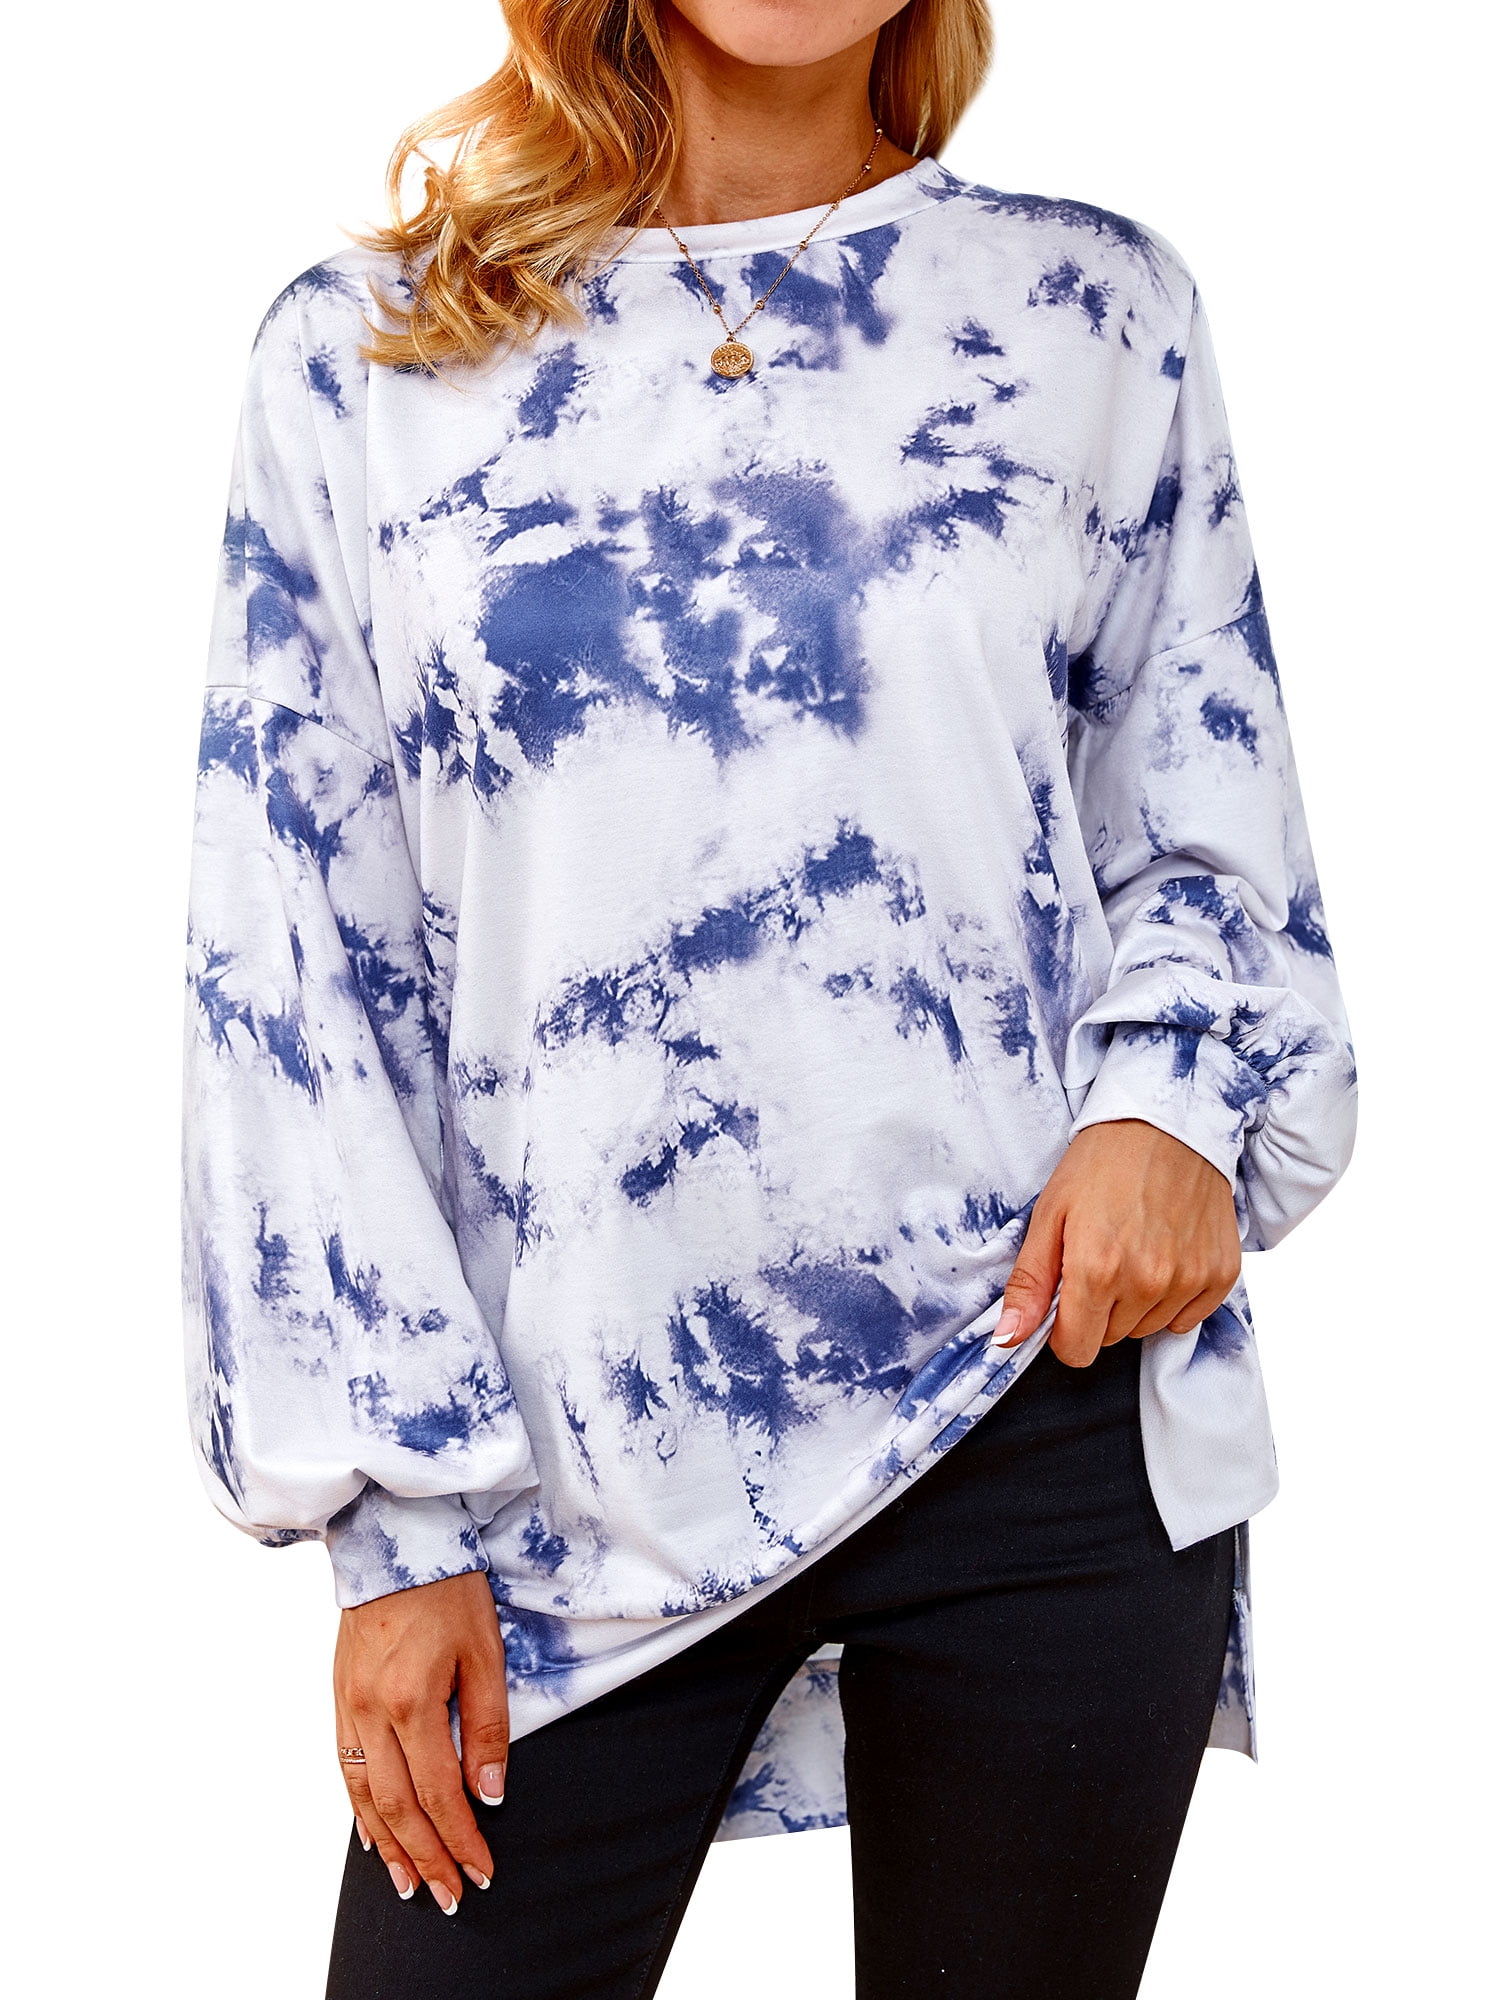 STARVNC Women Crew Neck Tie Dyed Printed Long Sleeve Pullover Top ...